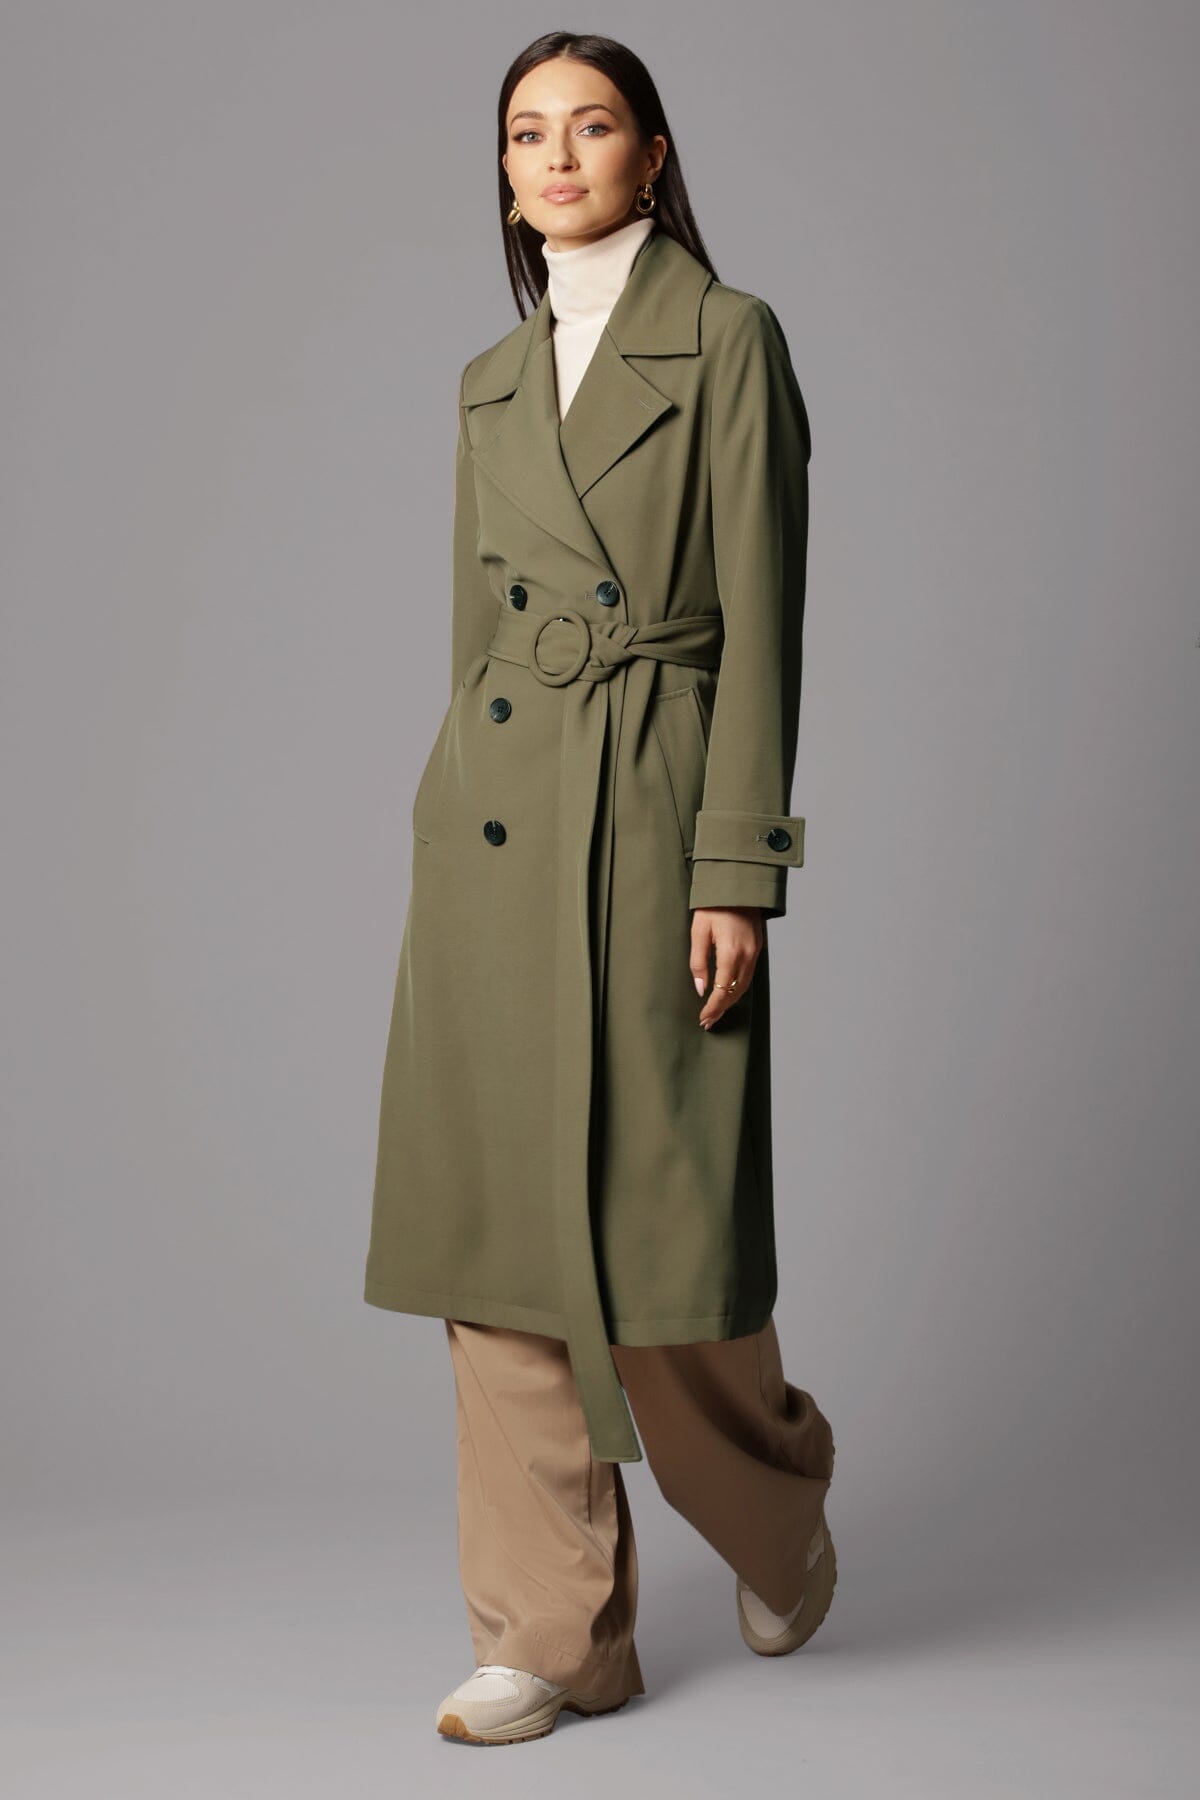 double breasted relaxed stretch crepe duster trench coat olive green outerwear - figure flattering designer fashion long coats for women